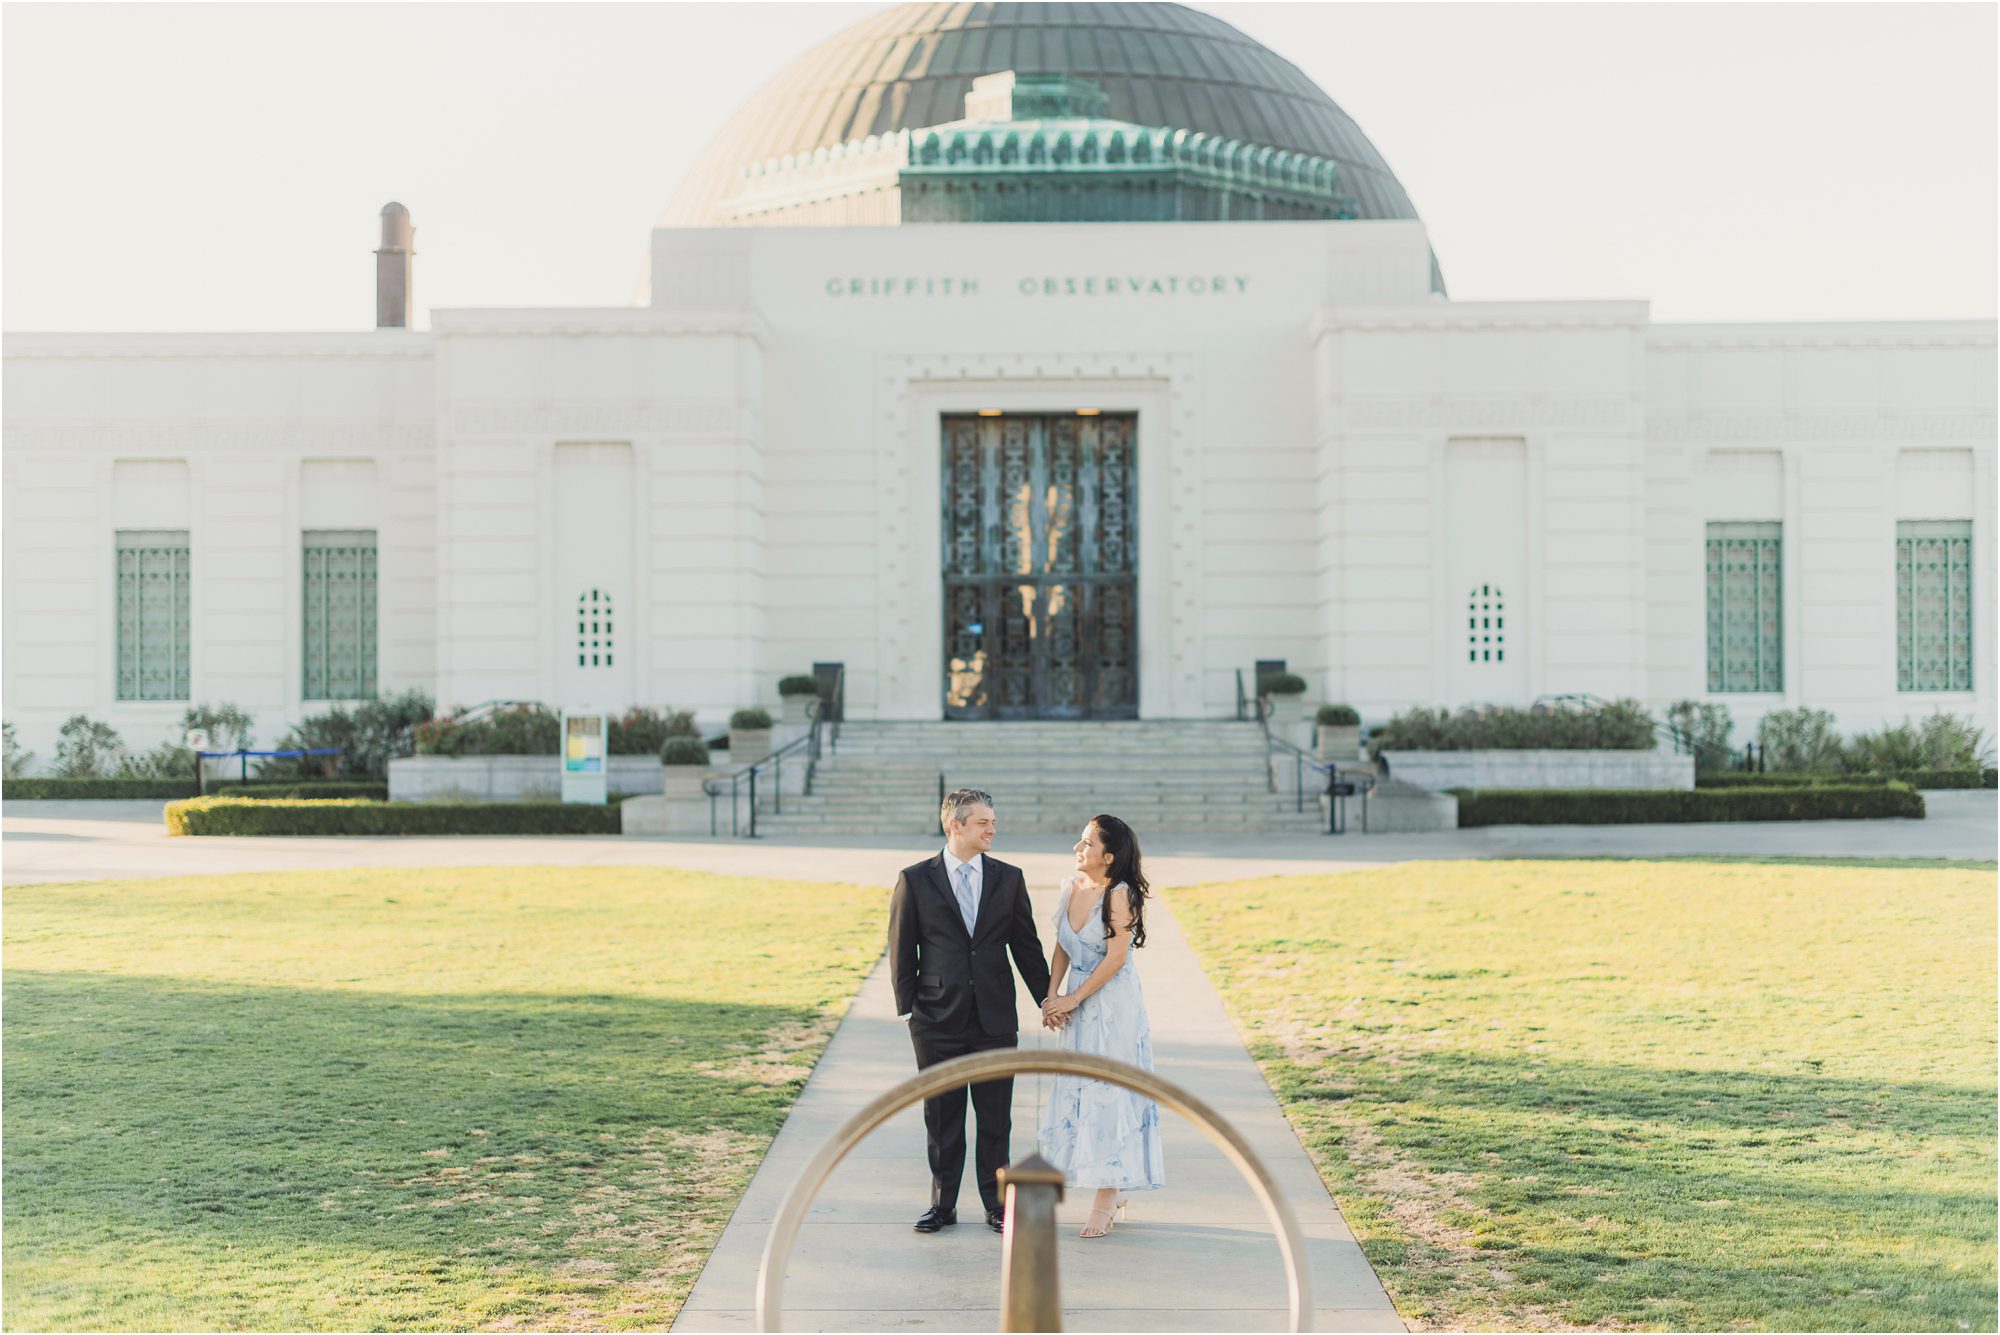 Griffith Observatory Engagement 0001